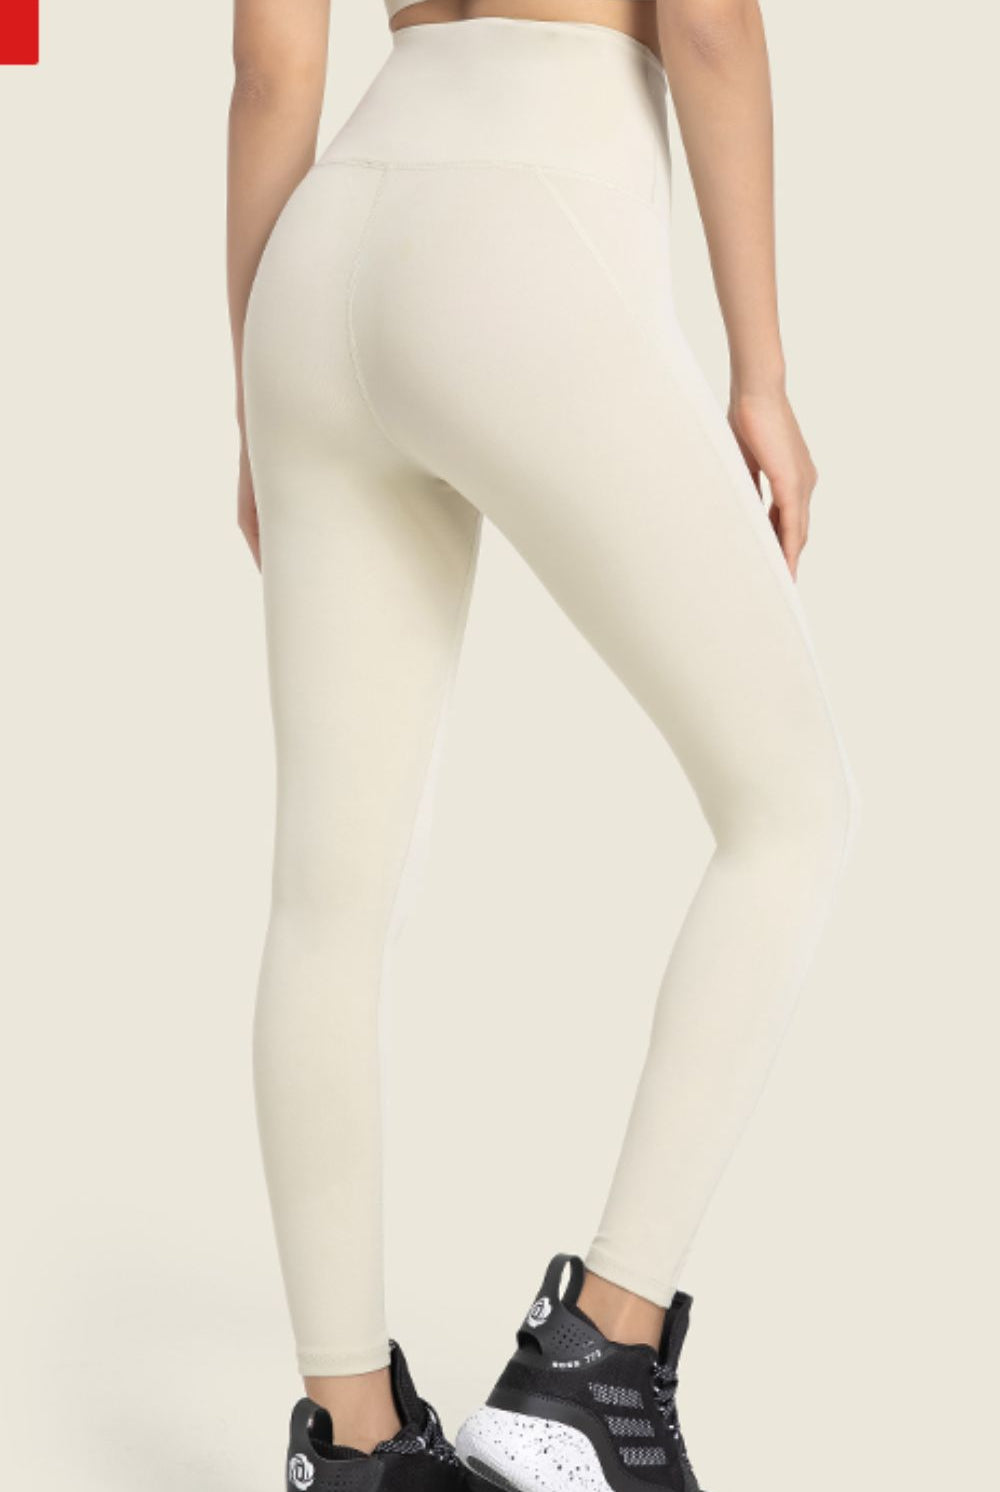 Antique White Seamless High-Rise Wide Waistband Yoga Leggings activewear